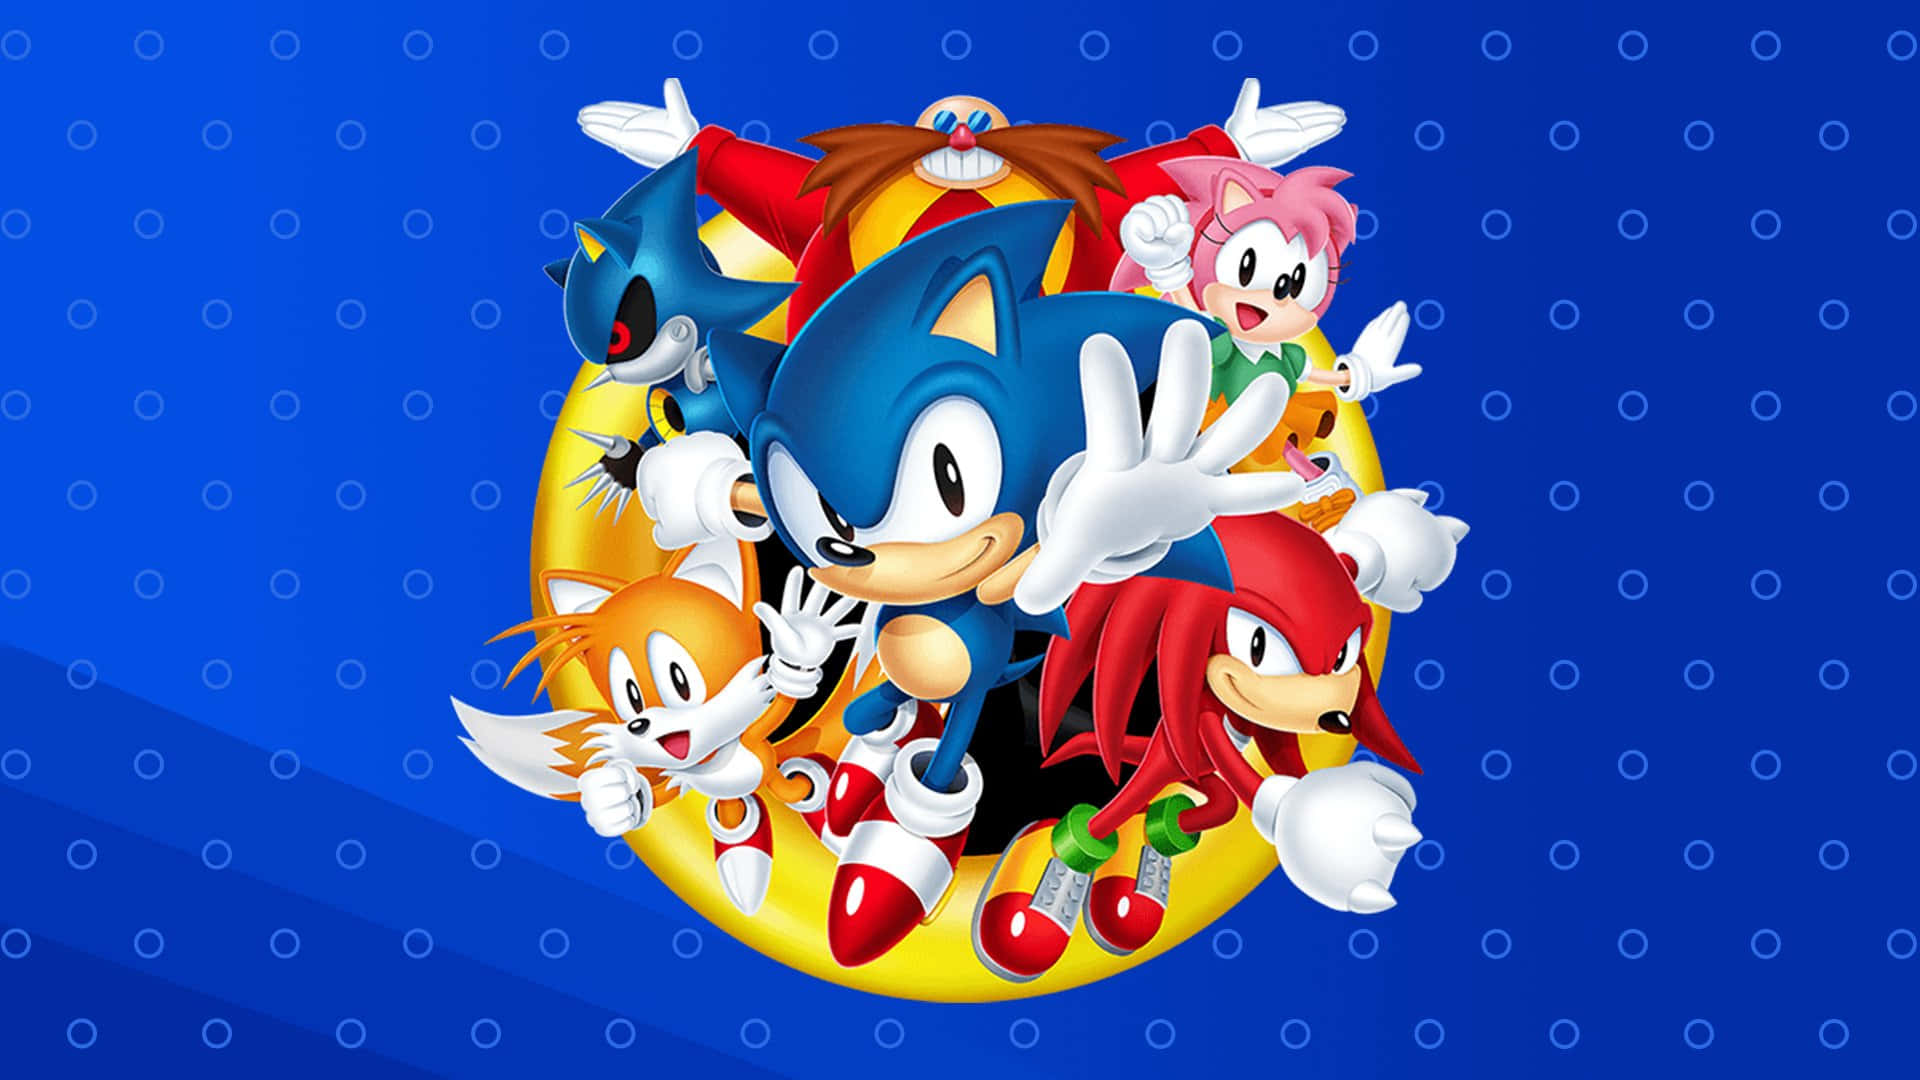 Classic Sonic in Action Wallpaper